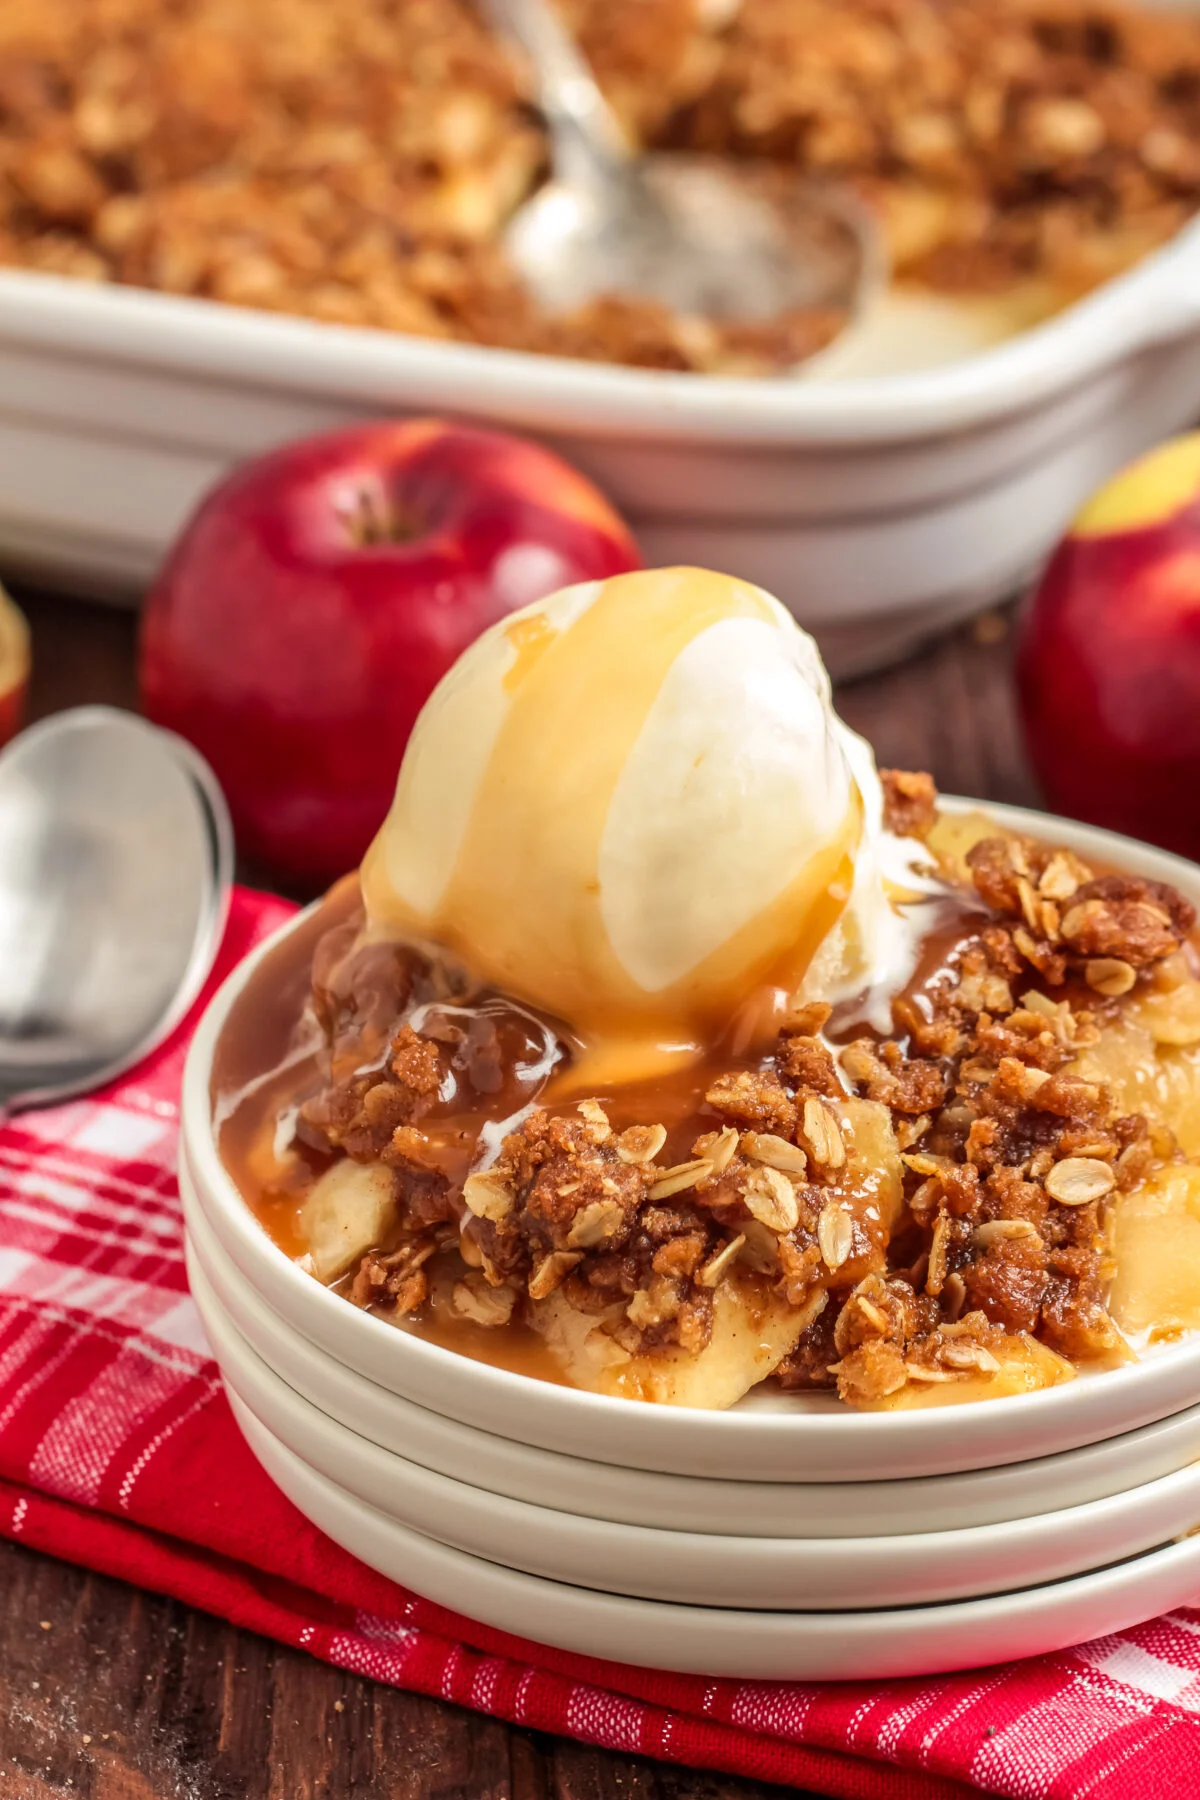 A classic, old fashioned apple crisp recipe, made with fresh apples and a crispy oat topping. It's simple, delicious and sure to please!